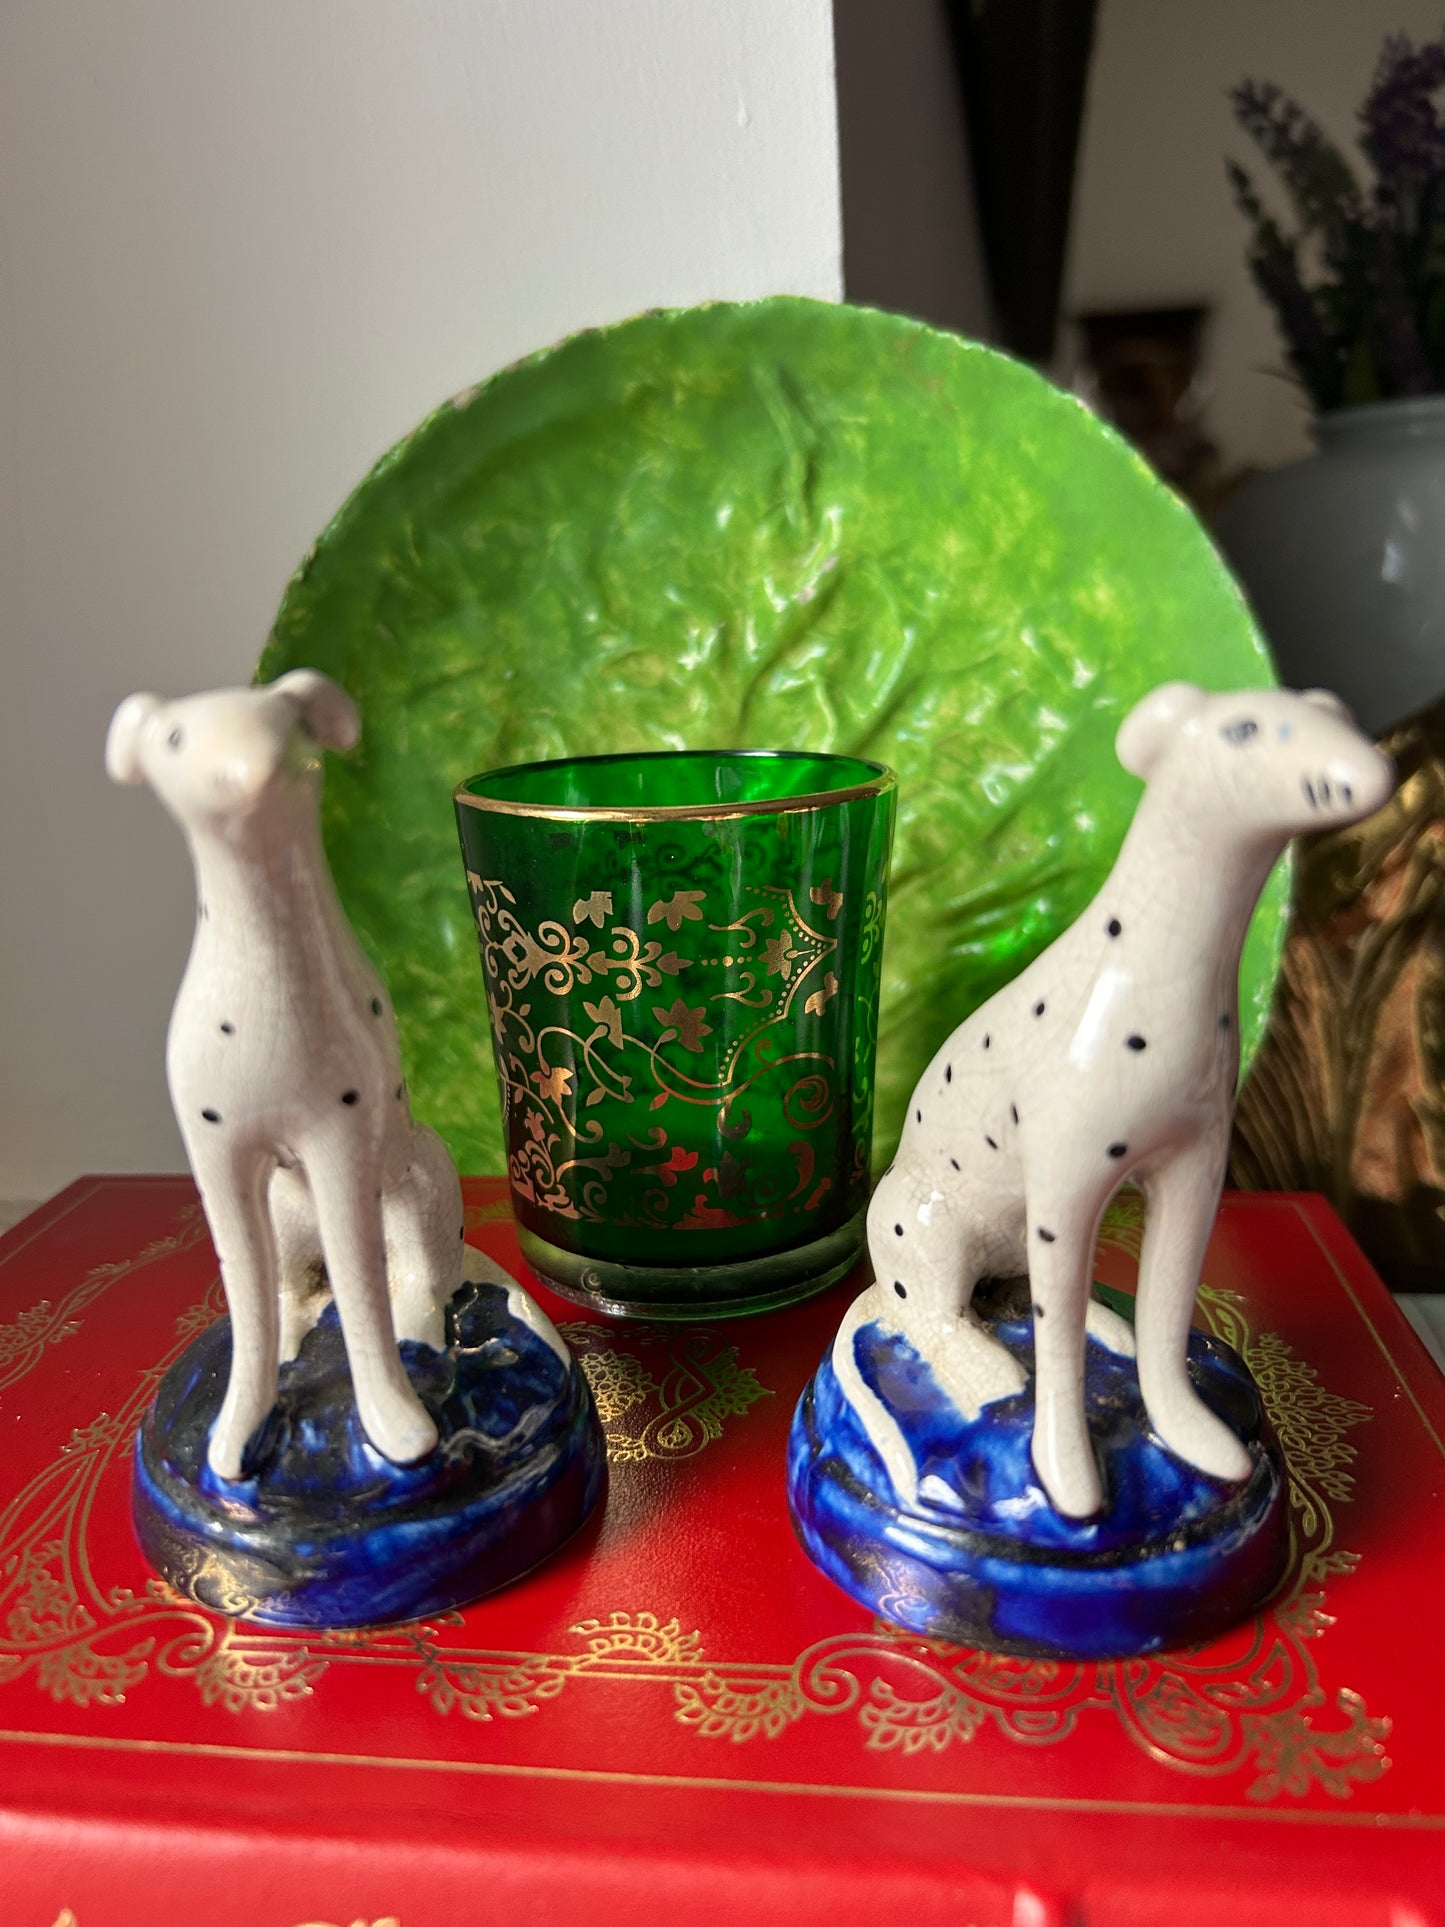 Small Pair of Antique Staffordshire Dalmatians on a Cobalt Base C.1860